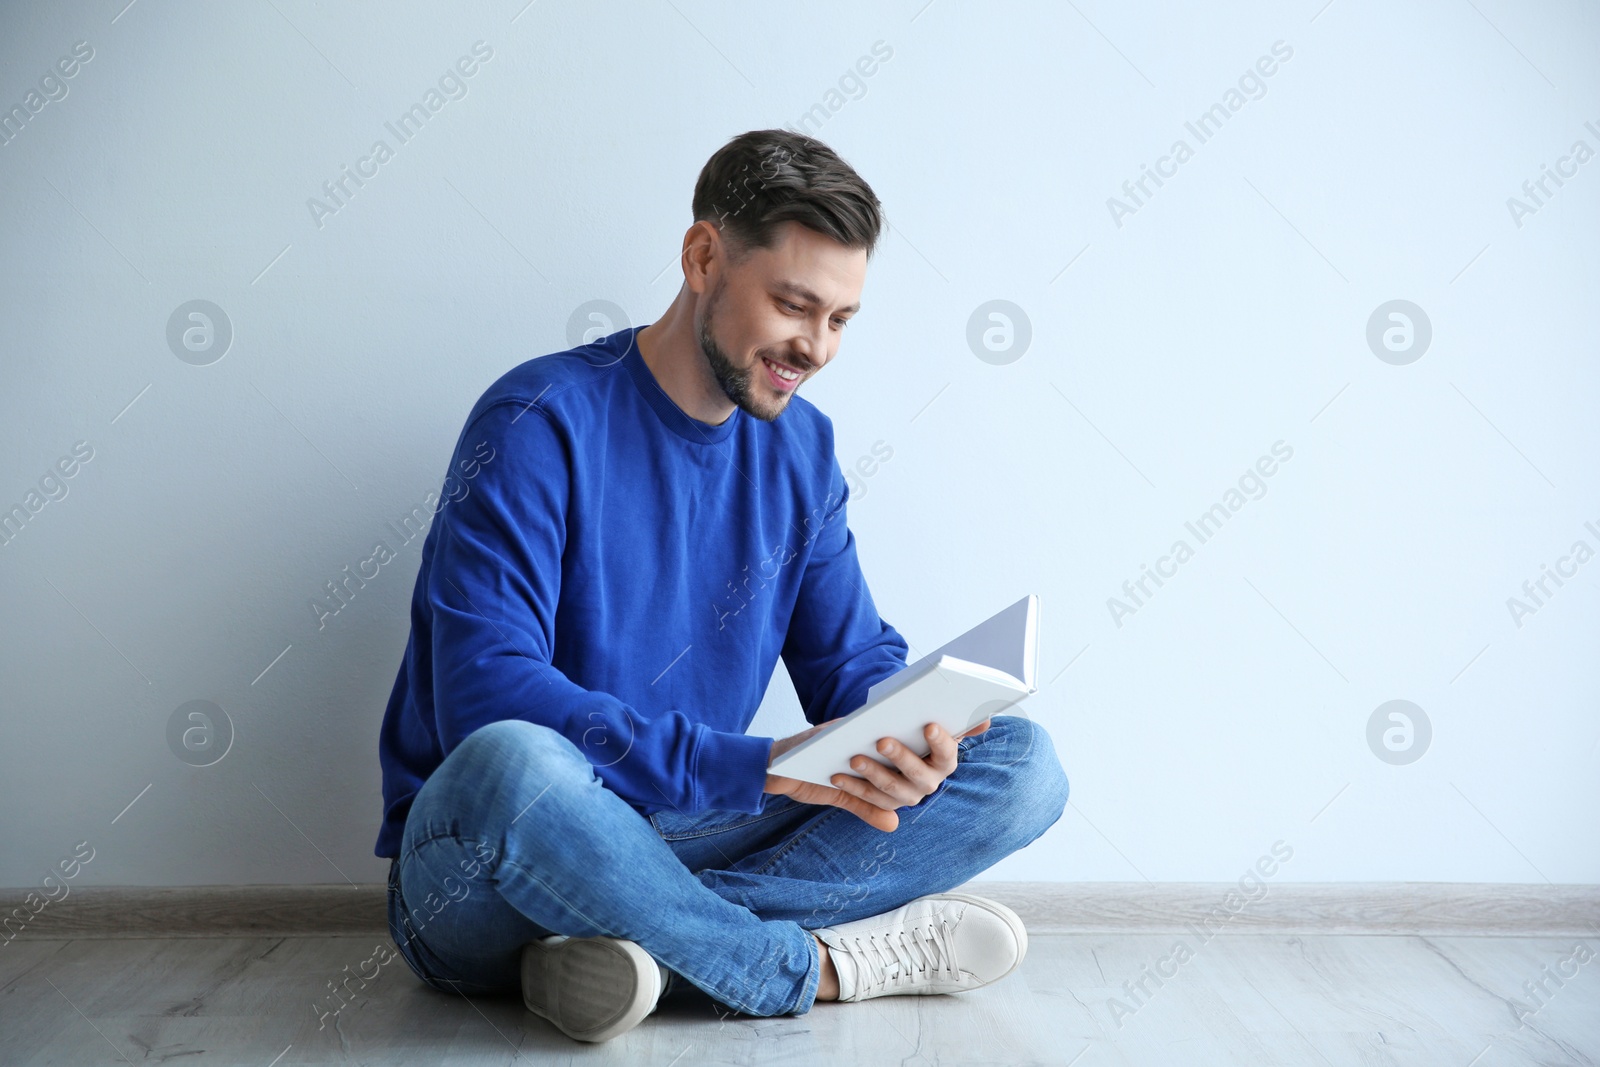 Photo of Handsome man reading book on floor near wall, space for text